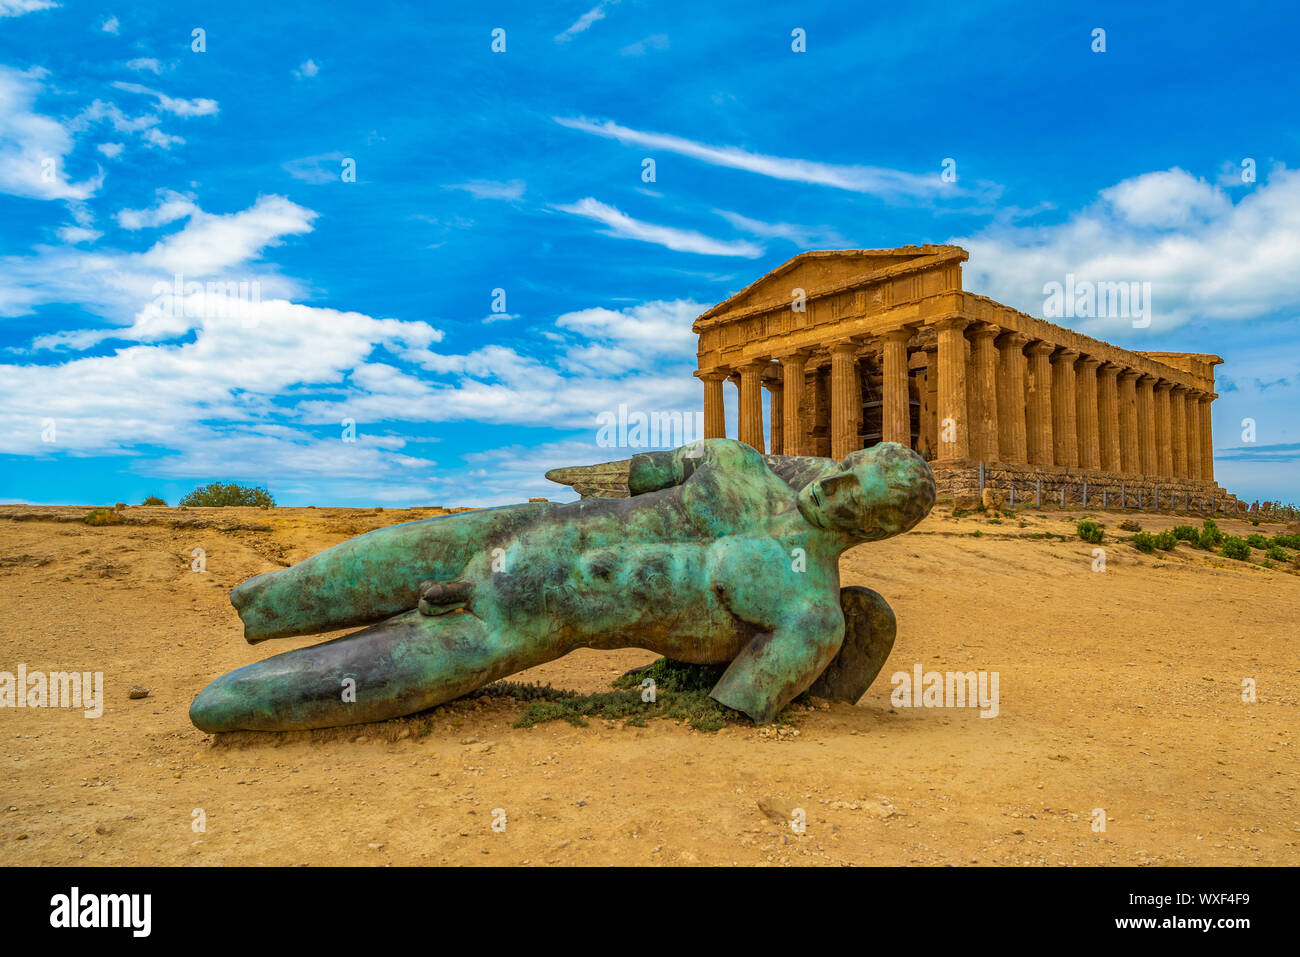 Temple of Concordia and the statue of Fallen Icarus, in the Valley of the Temples, Agrigento, Sicily, Italy Stock Photo